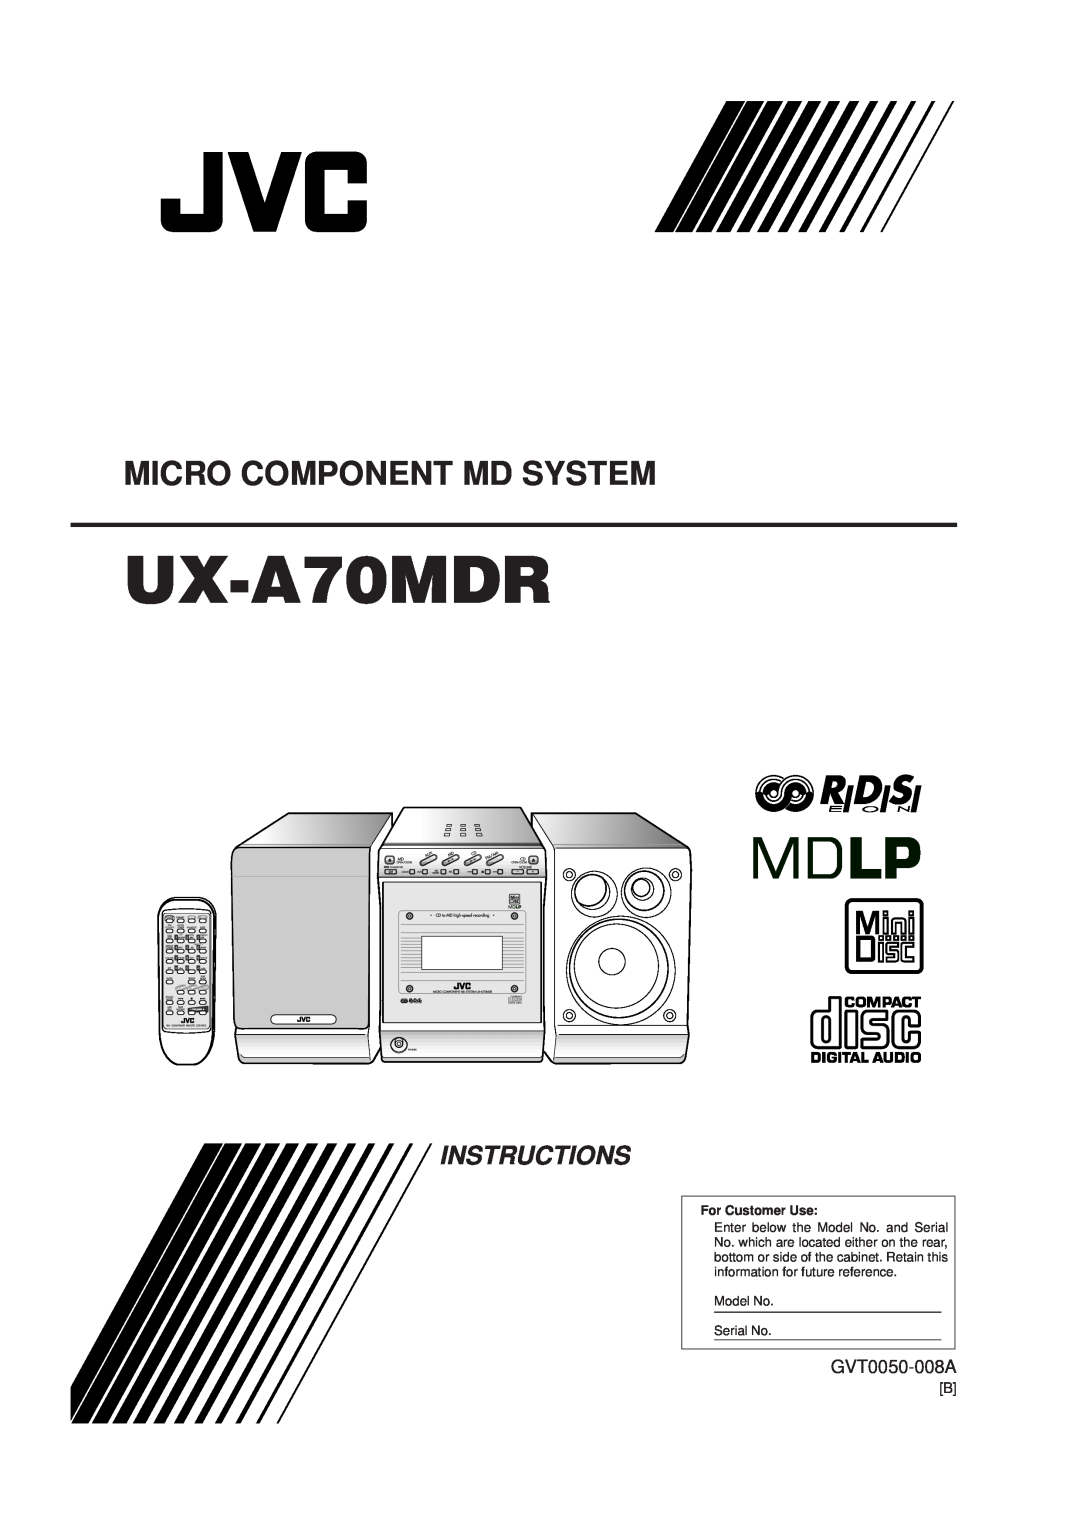 JVC UX-A70MDR manual GVT0050-008A, Micro Component Md System, Instructions, For Customer Use, Model No Serial No, Mark 